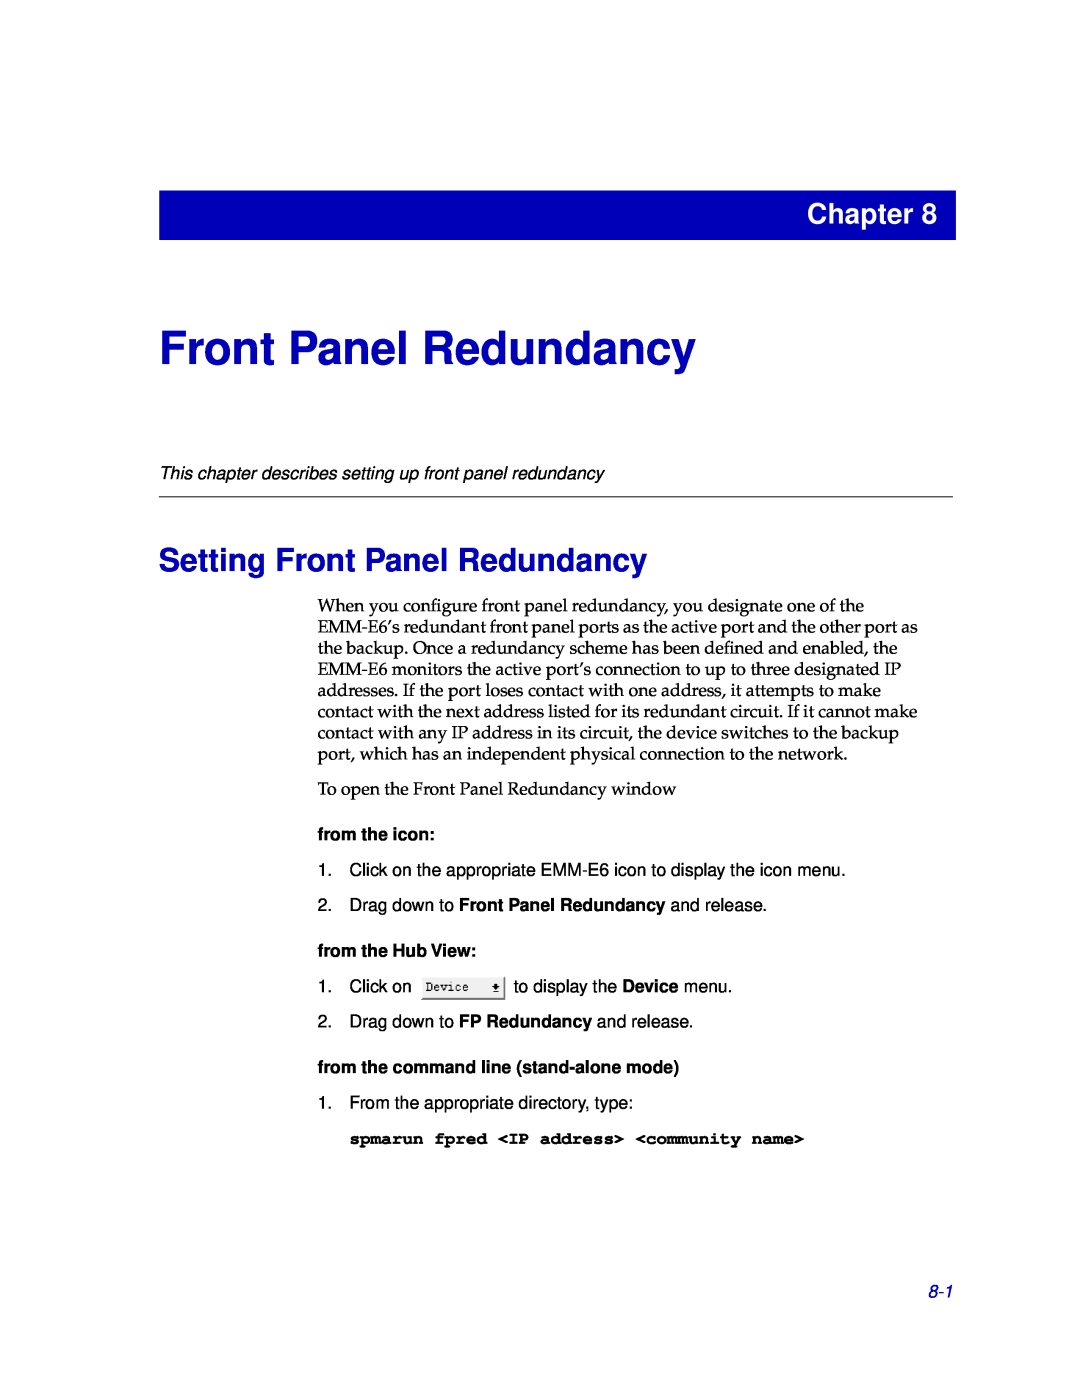 Cabletron Systems EMM-E6 Setting Front Panel Redundancy, This chapter describes setting up front panel redundancy 